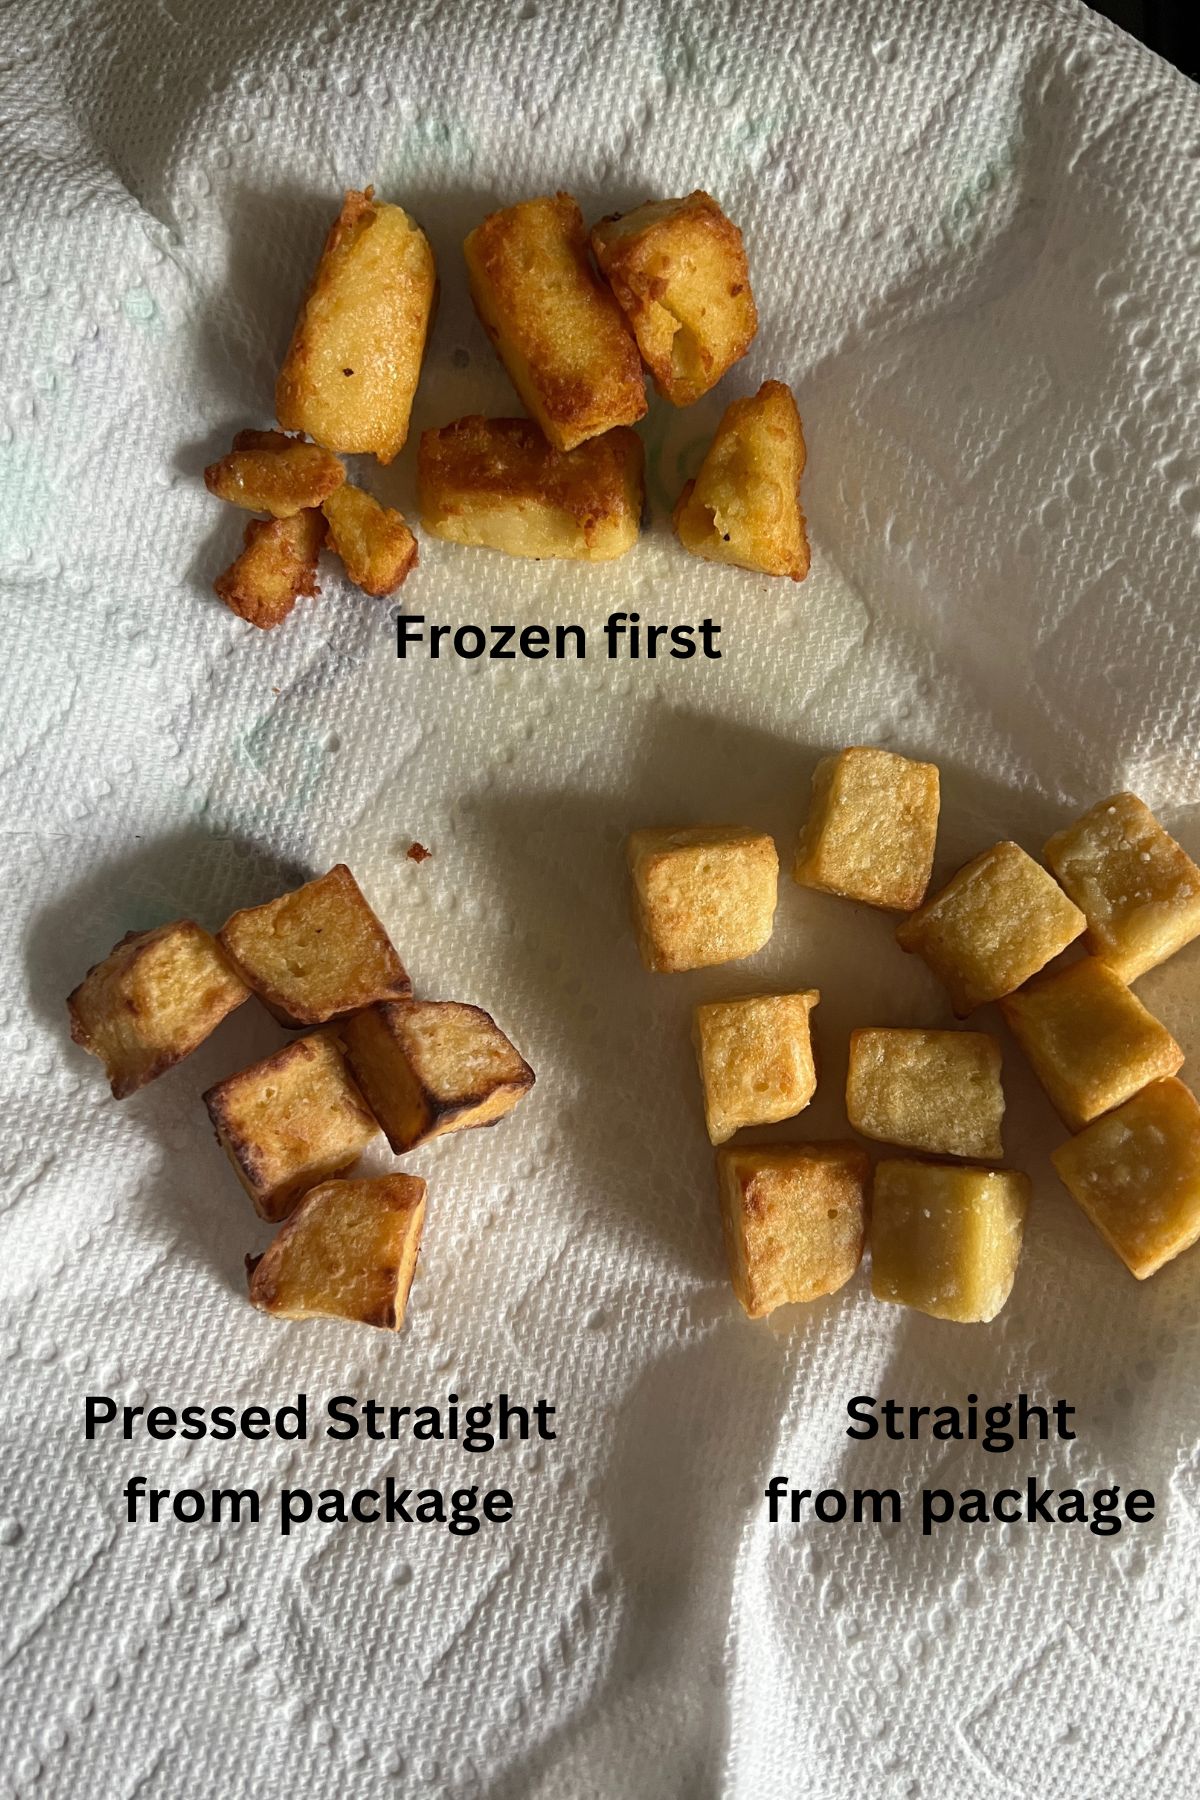 three sets of cooked chickpea tofu cooked differently on a paper towel.